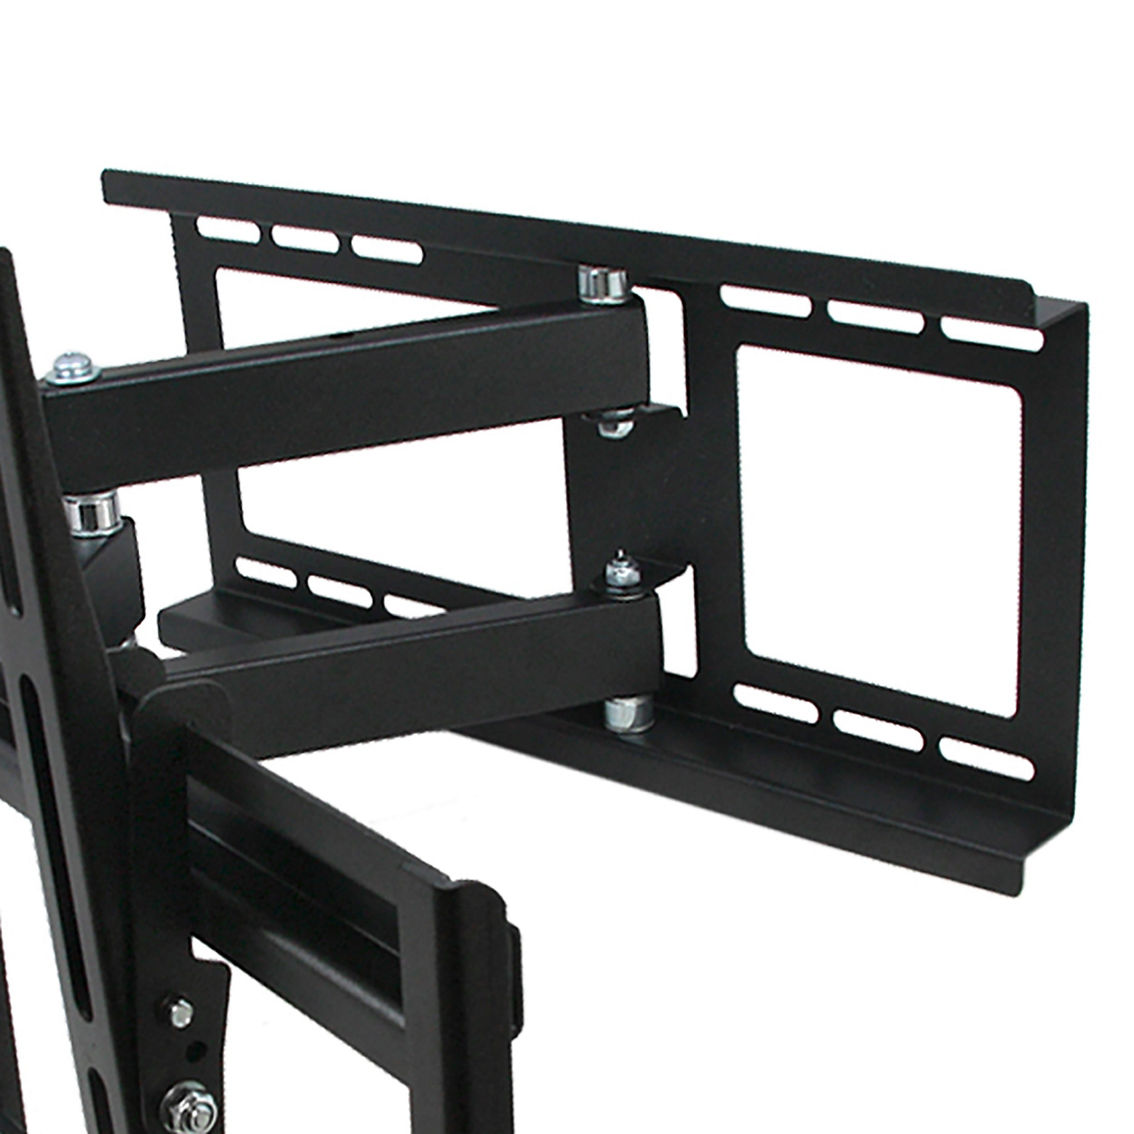 MegaMounts Full Motion Television Wall Mount with Bubble Level for 32-70 Inch Di - Image 2 of 4